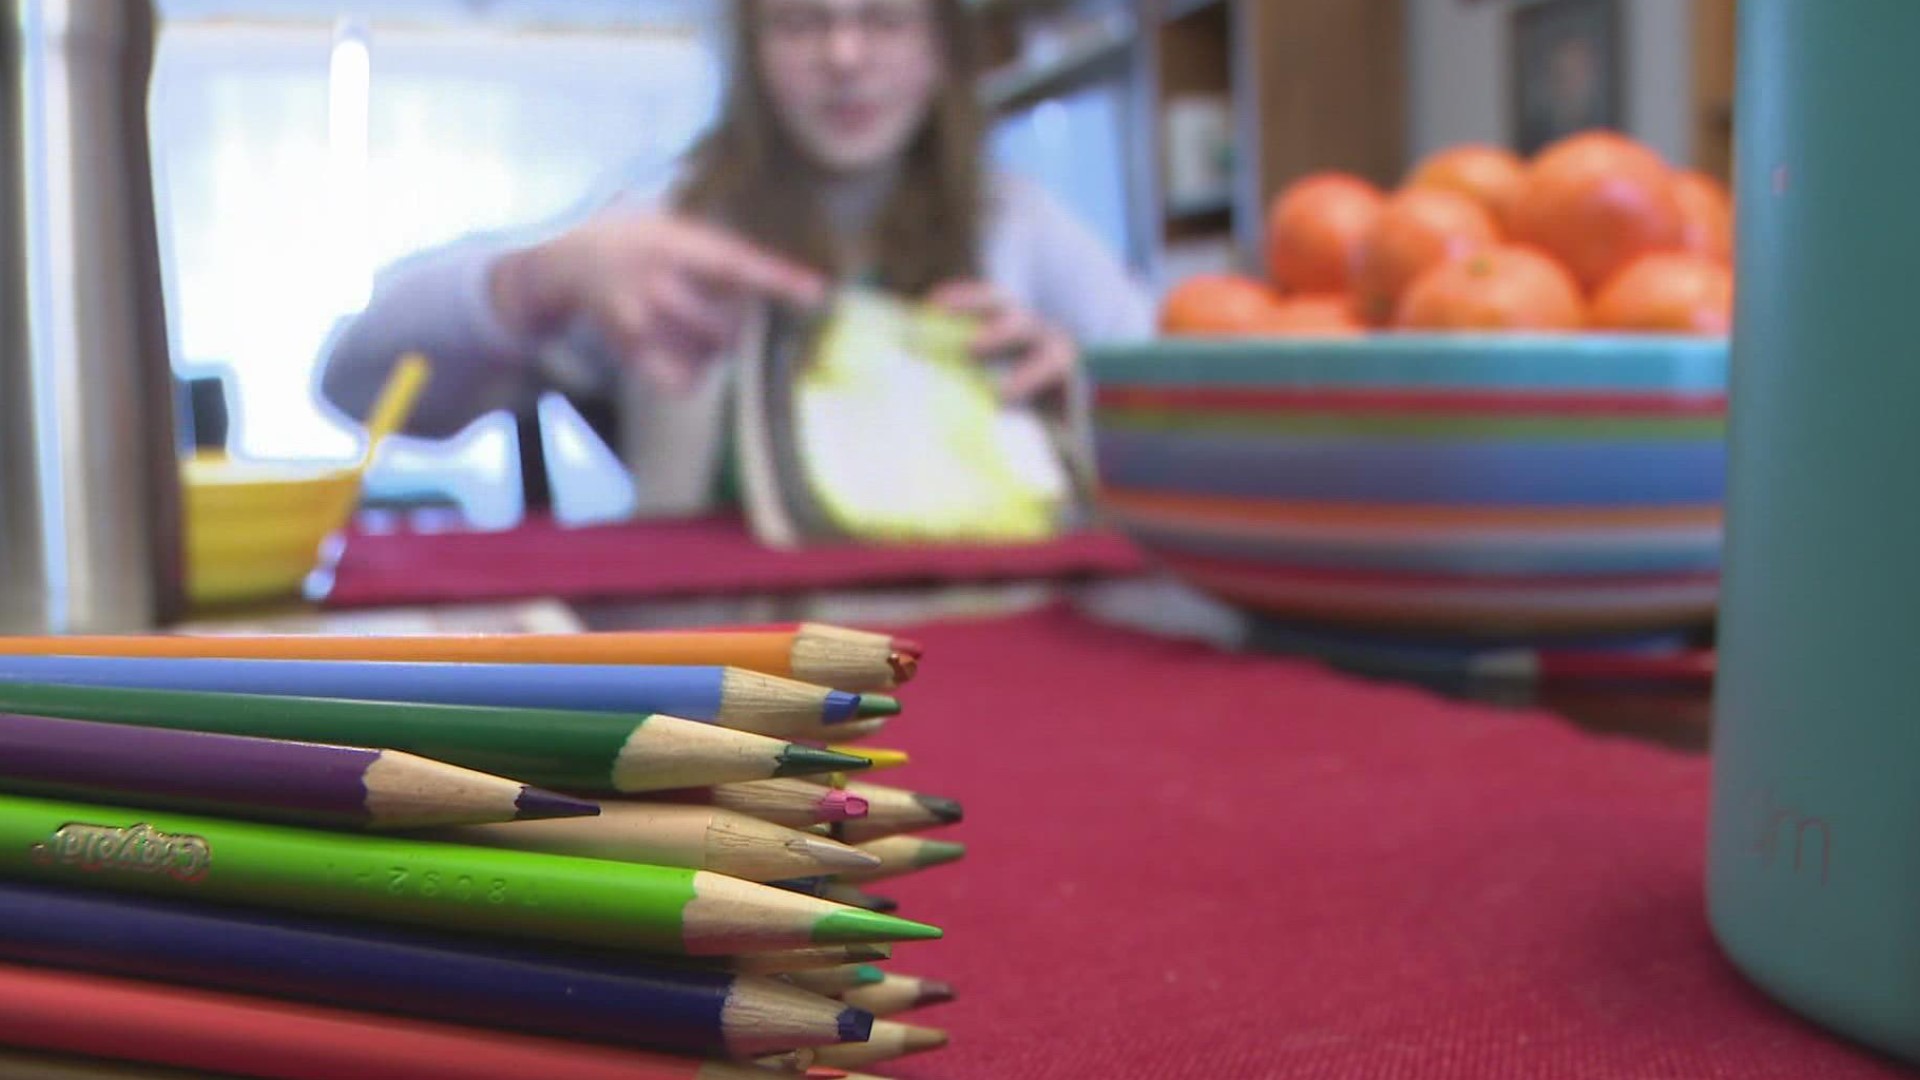 Inflation may be affecting the prices of supplies as kids get ready to return to the classroom.